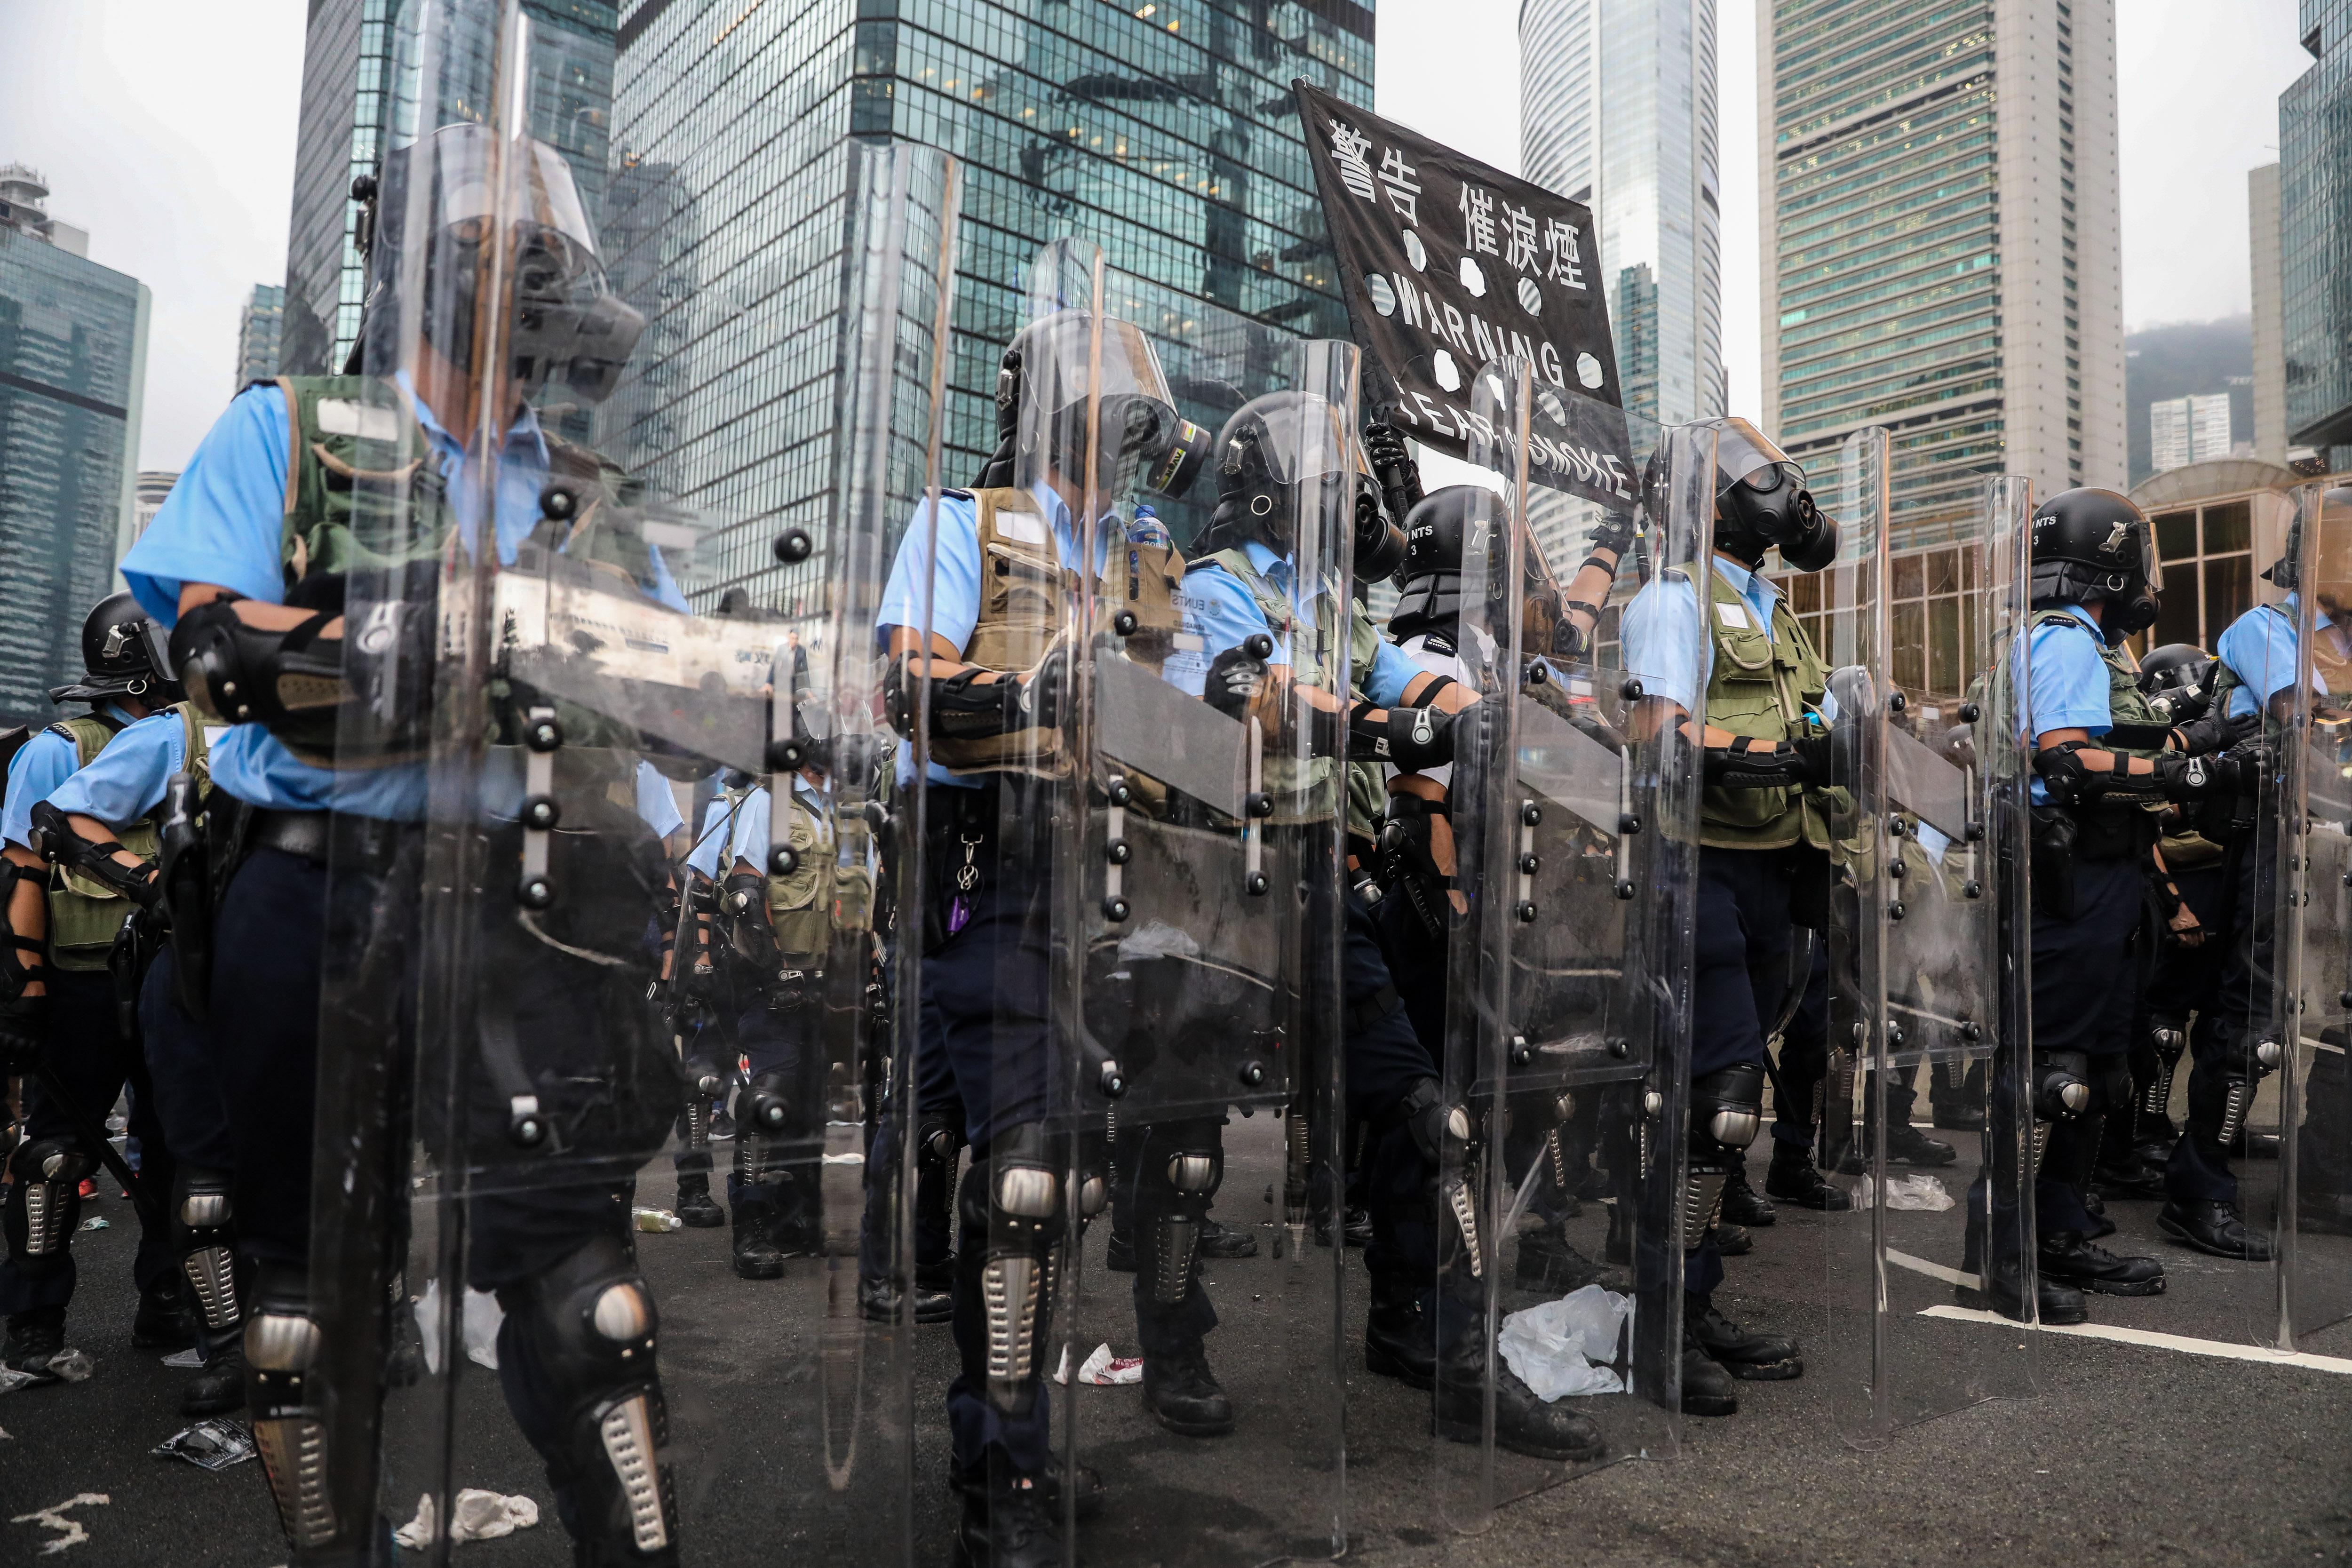 Police stand ready to use tear gas on protestors in Hong Kong.